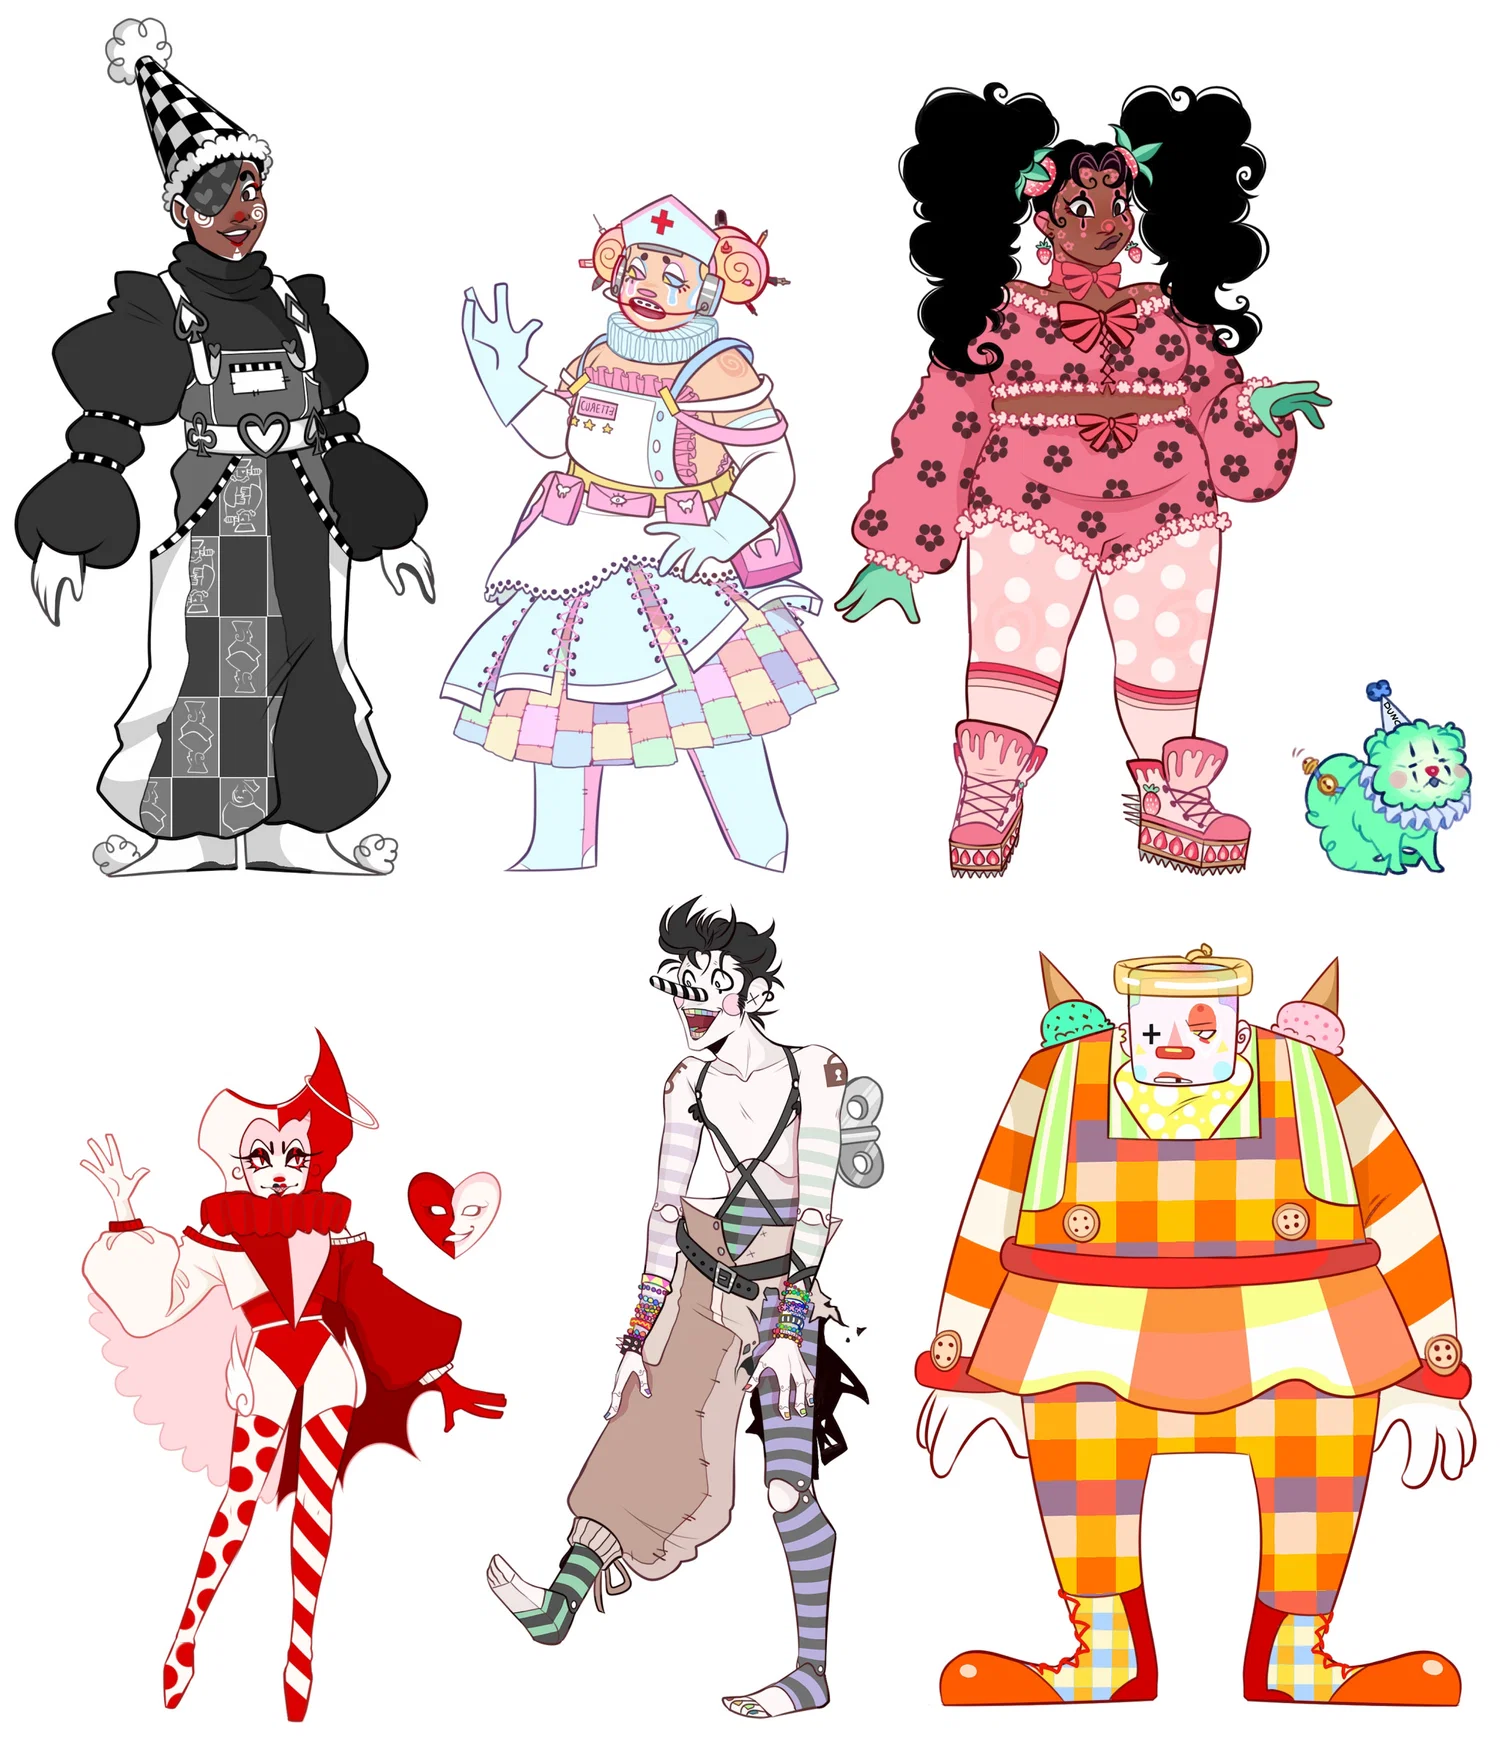 Drawings of multiple clowns lined up. They are all different sizes, colors, and types of clown.